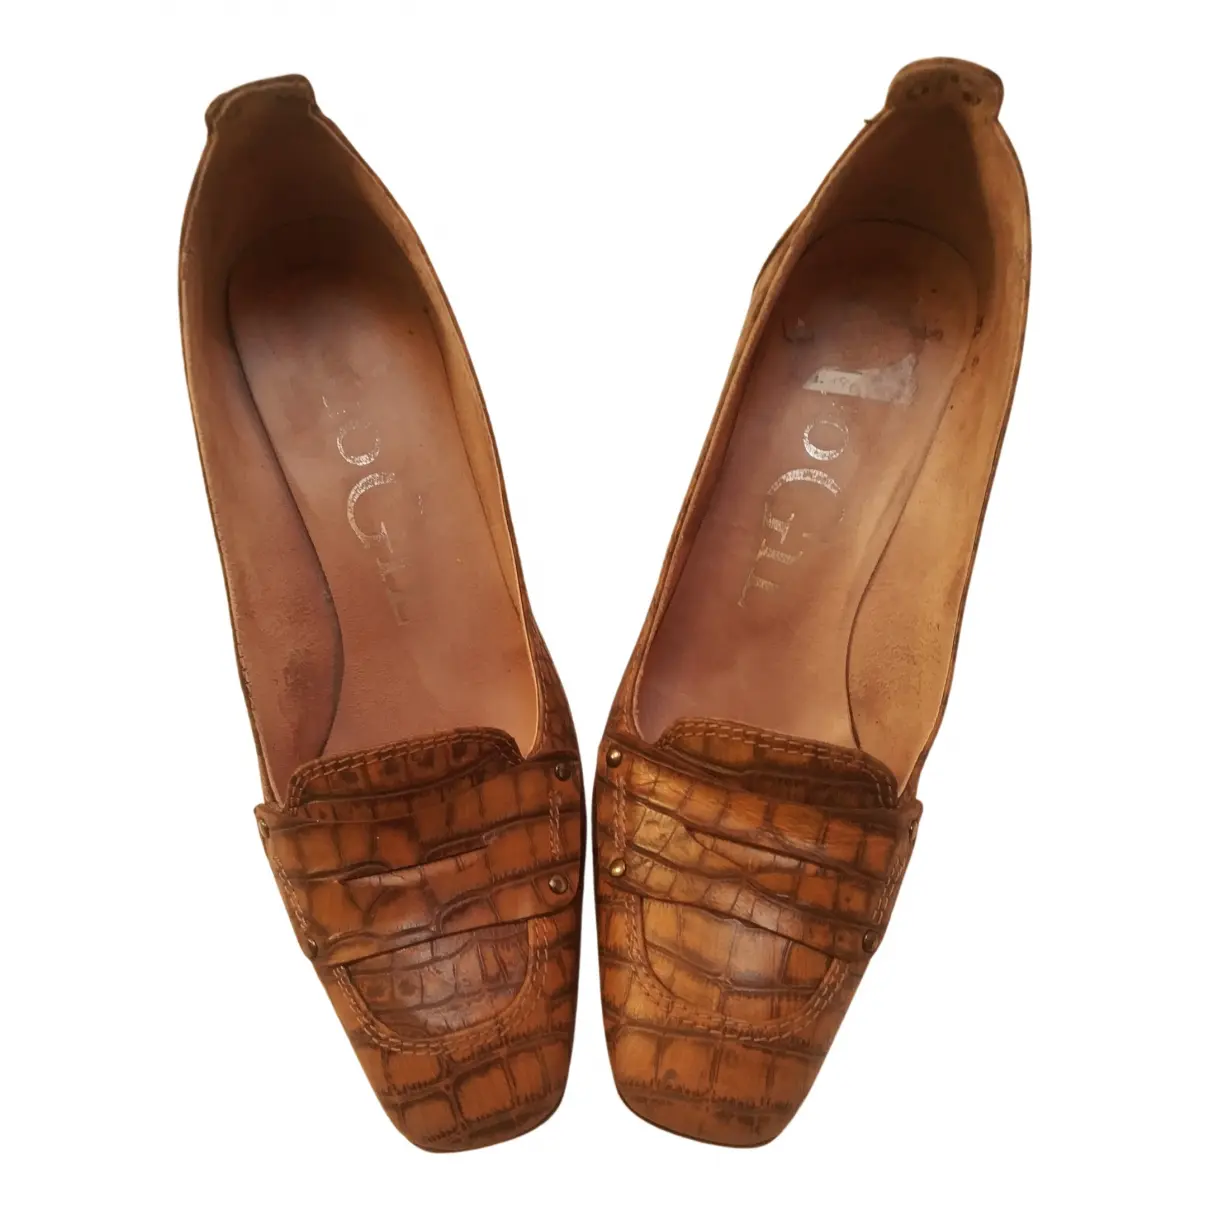 Leather flats Paco Gil